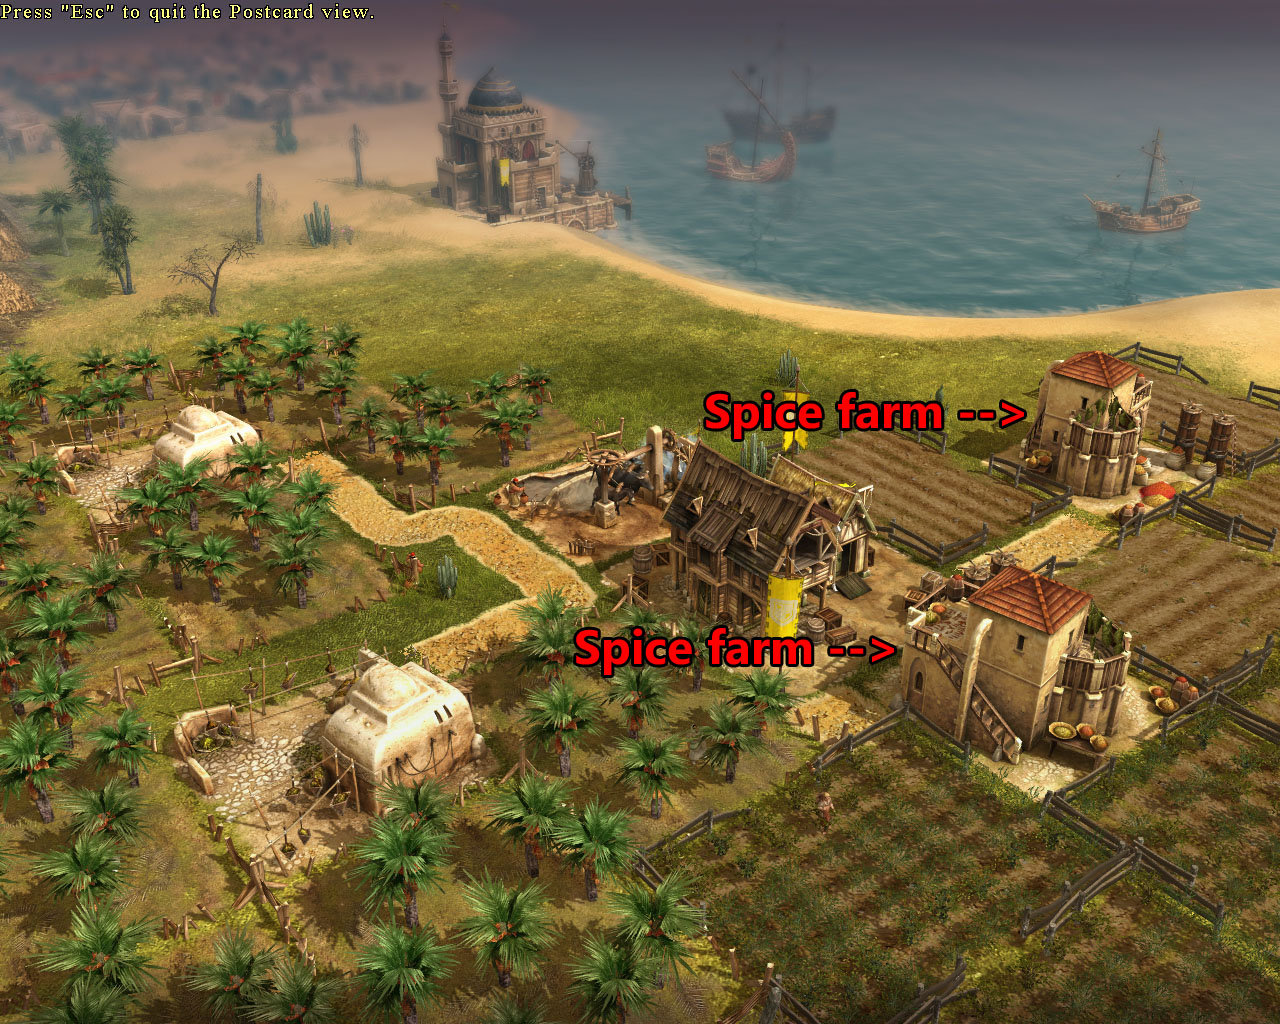 anno 1404 buy ships from northburgh